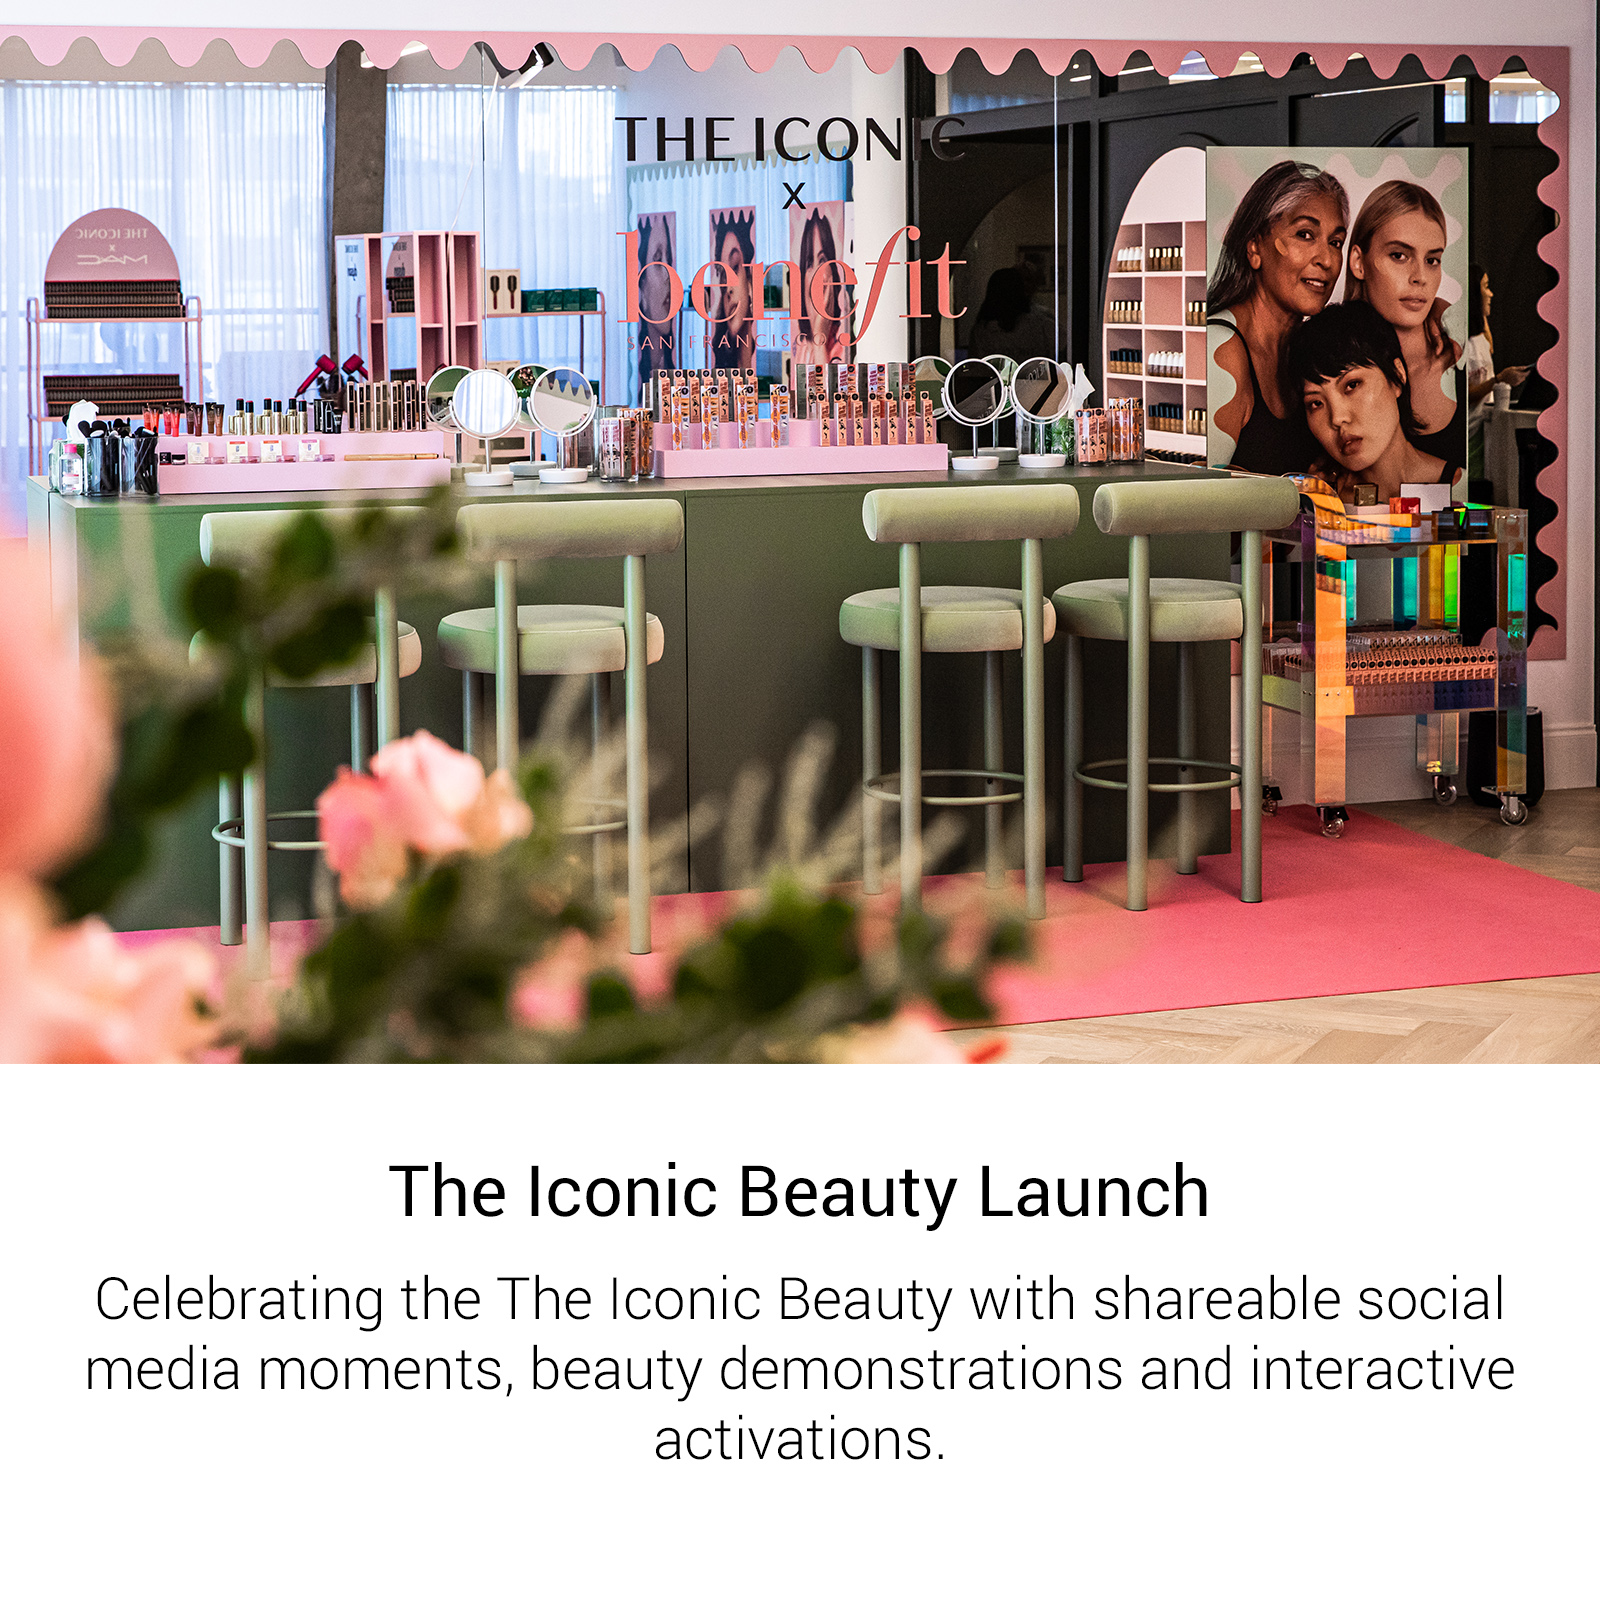 The Iconic Beauty Launch